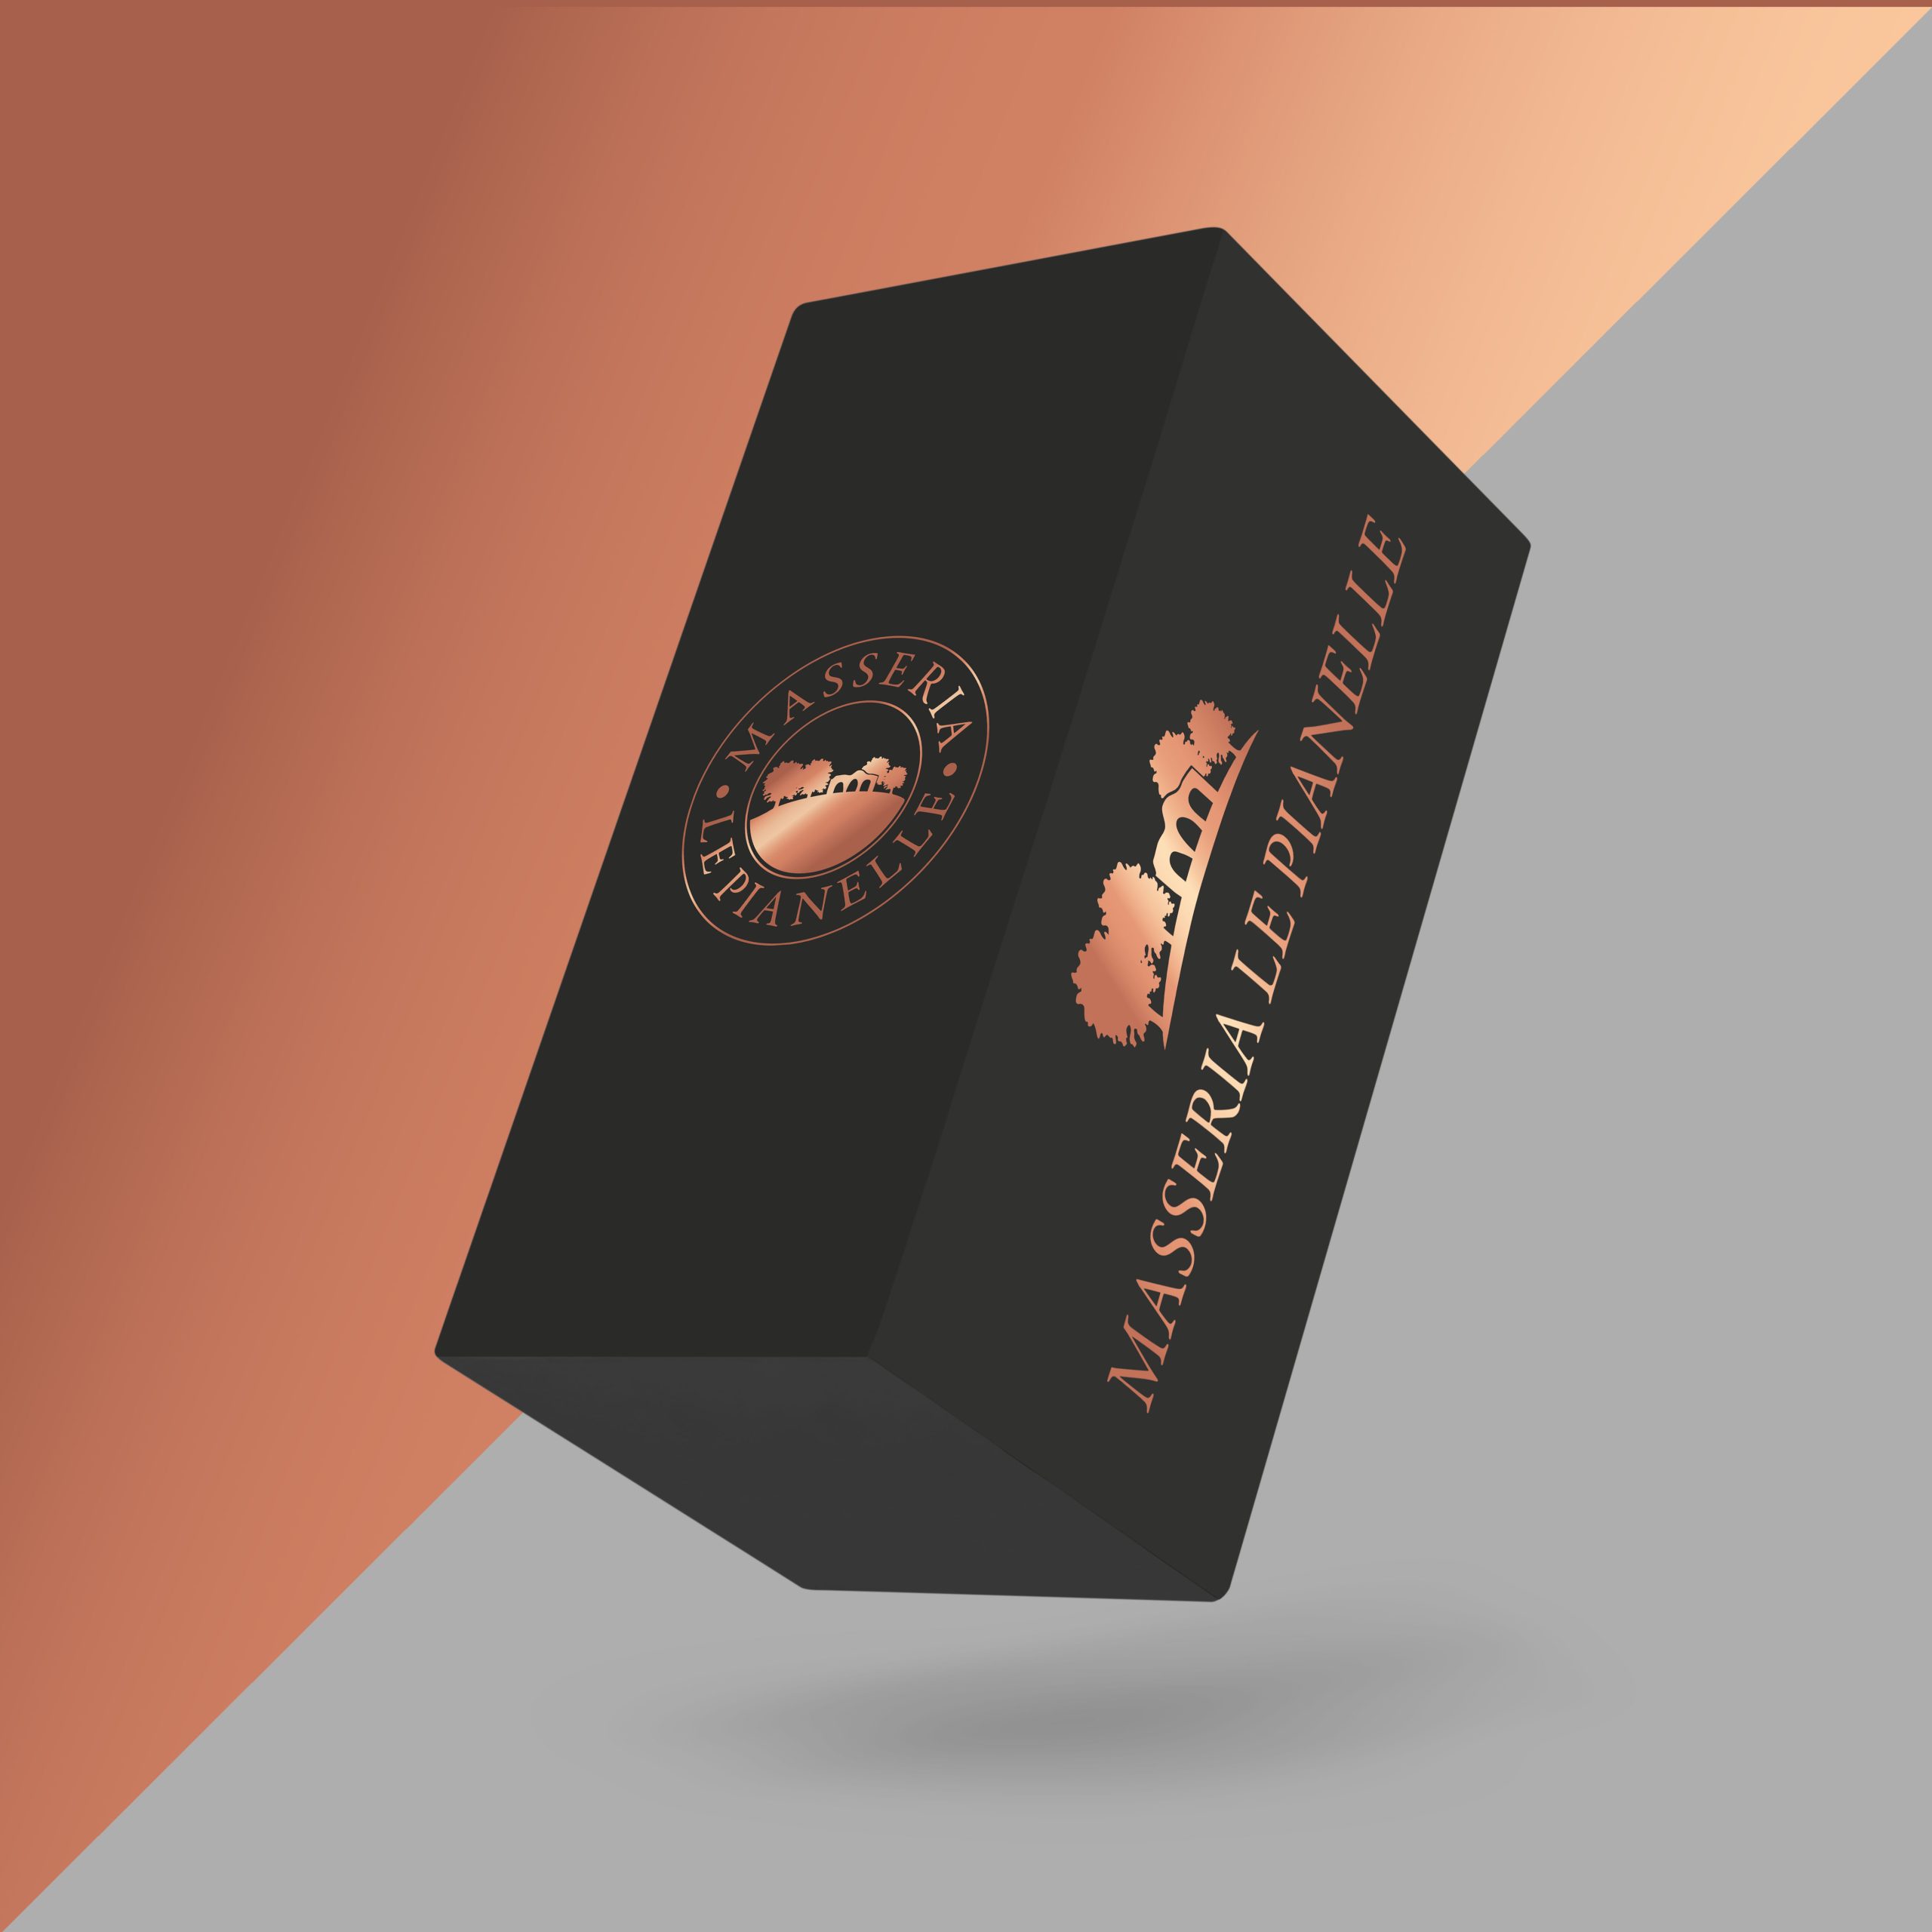 Packaging mockup psd with black box